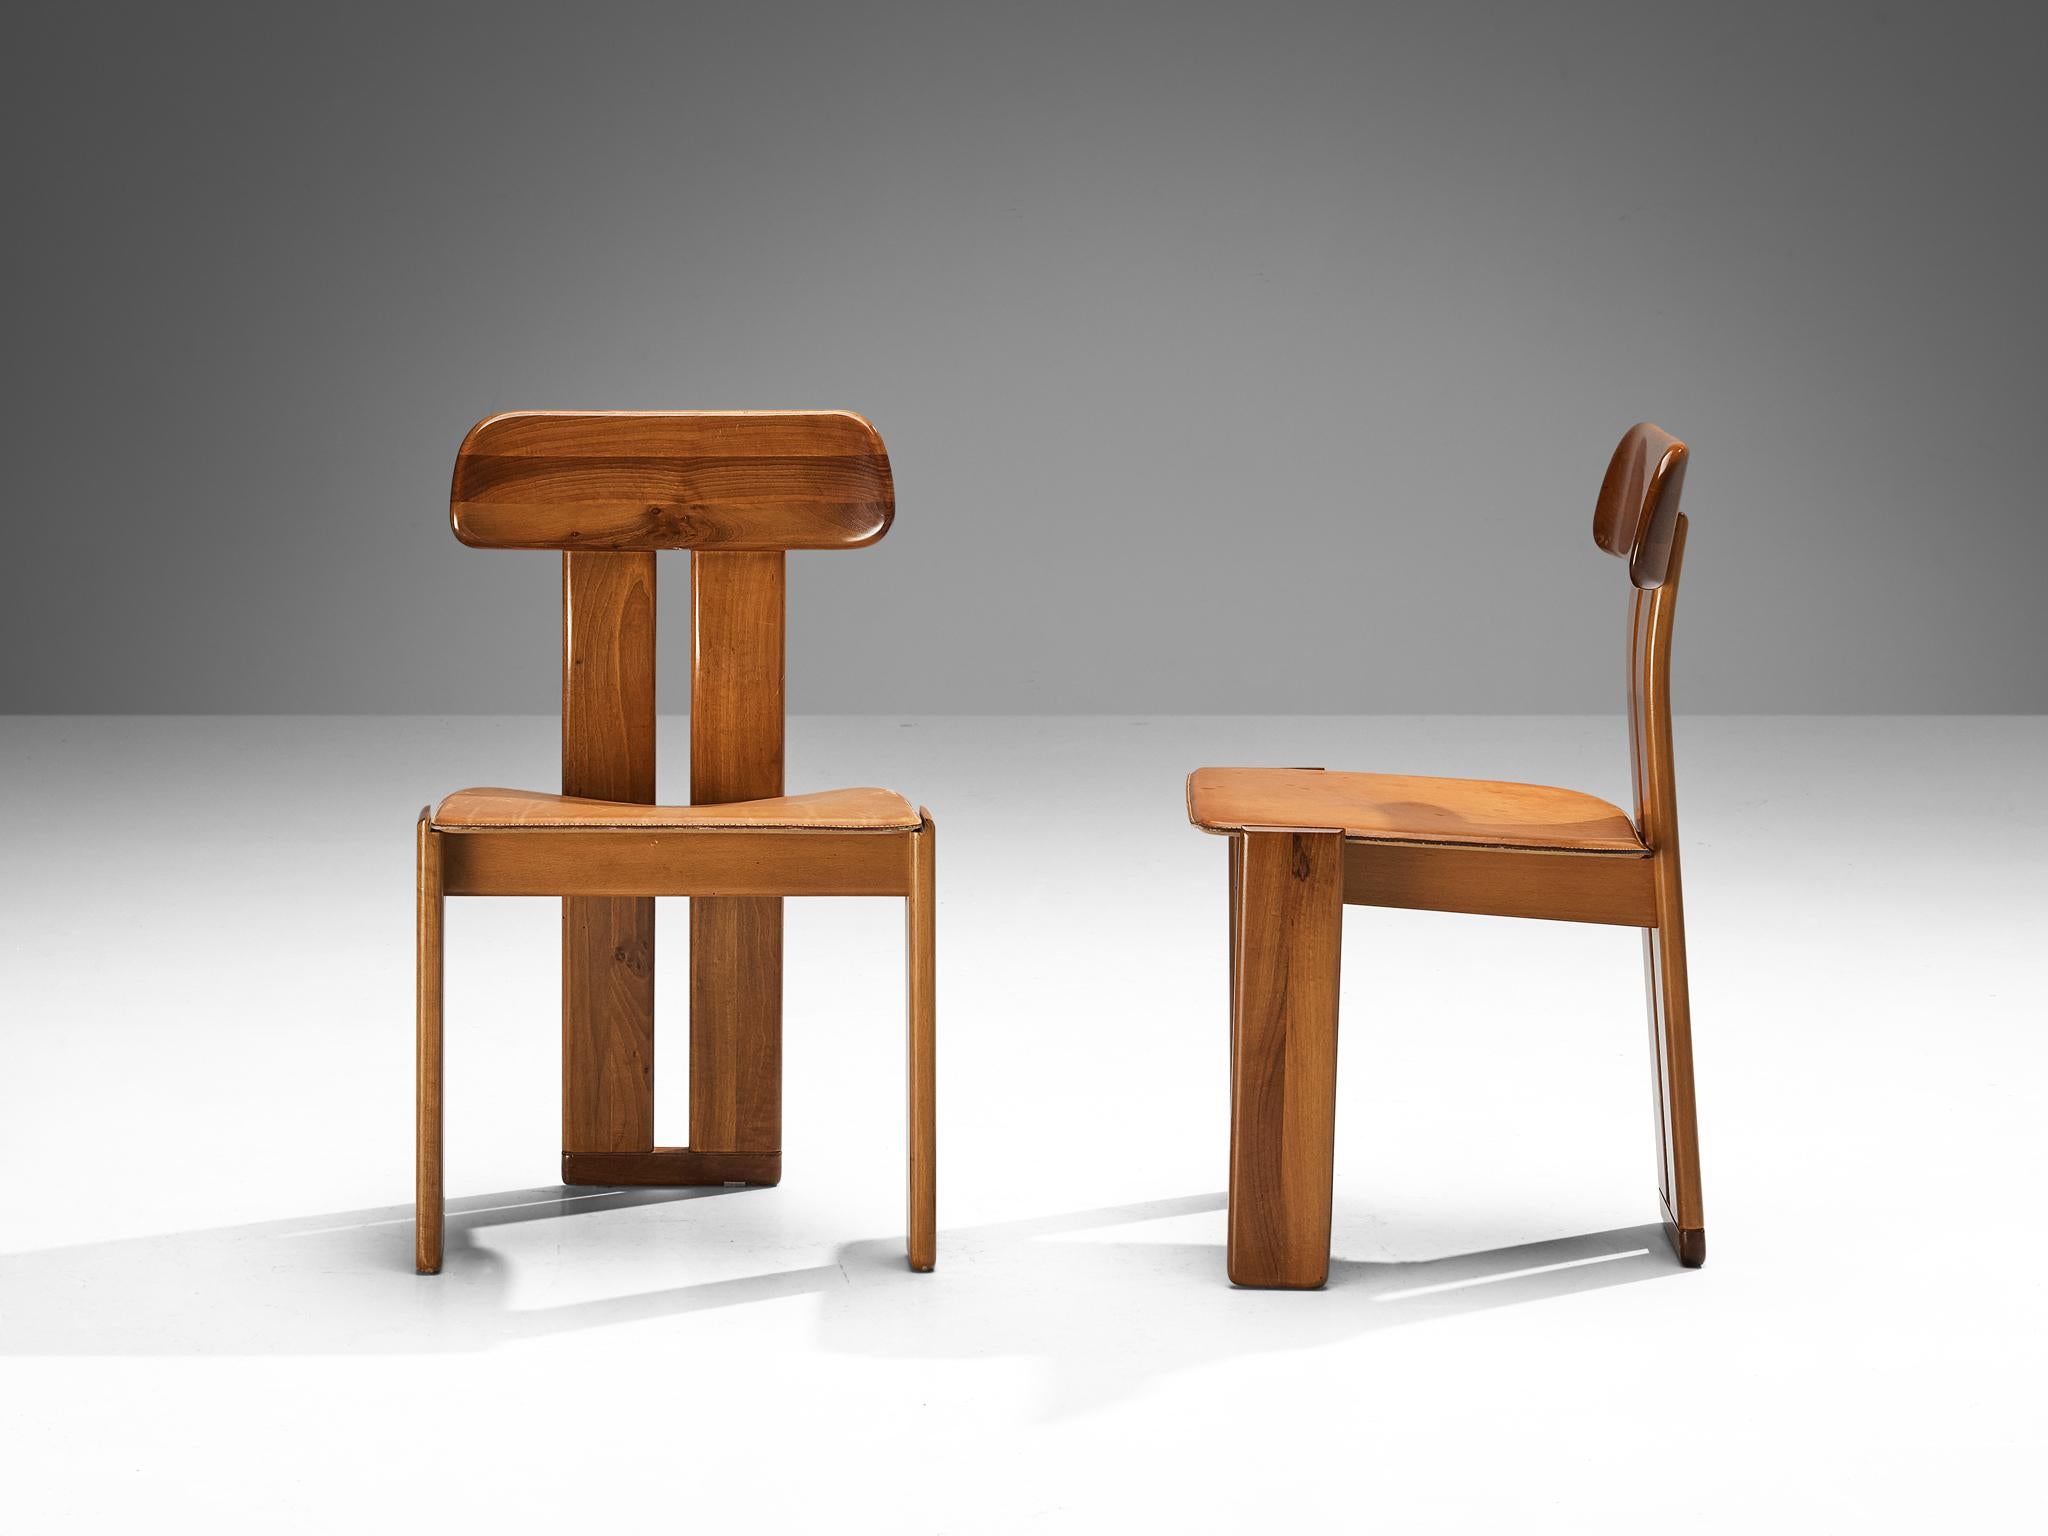 Mario Marenco for Mobil Girgi 'Sapporo' Pair of Dining Chairs in Walnut  2